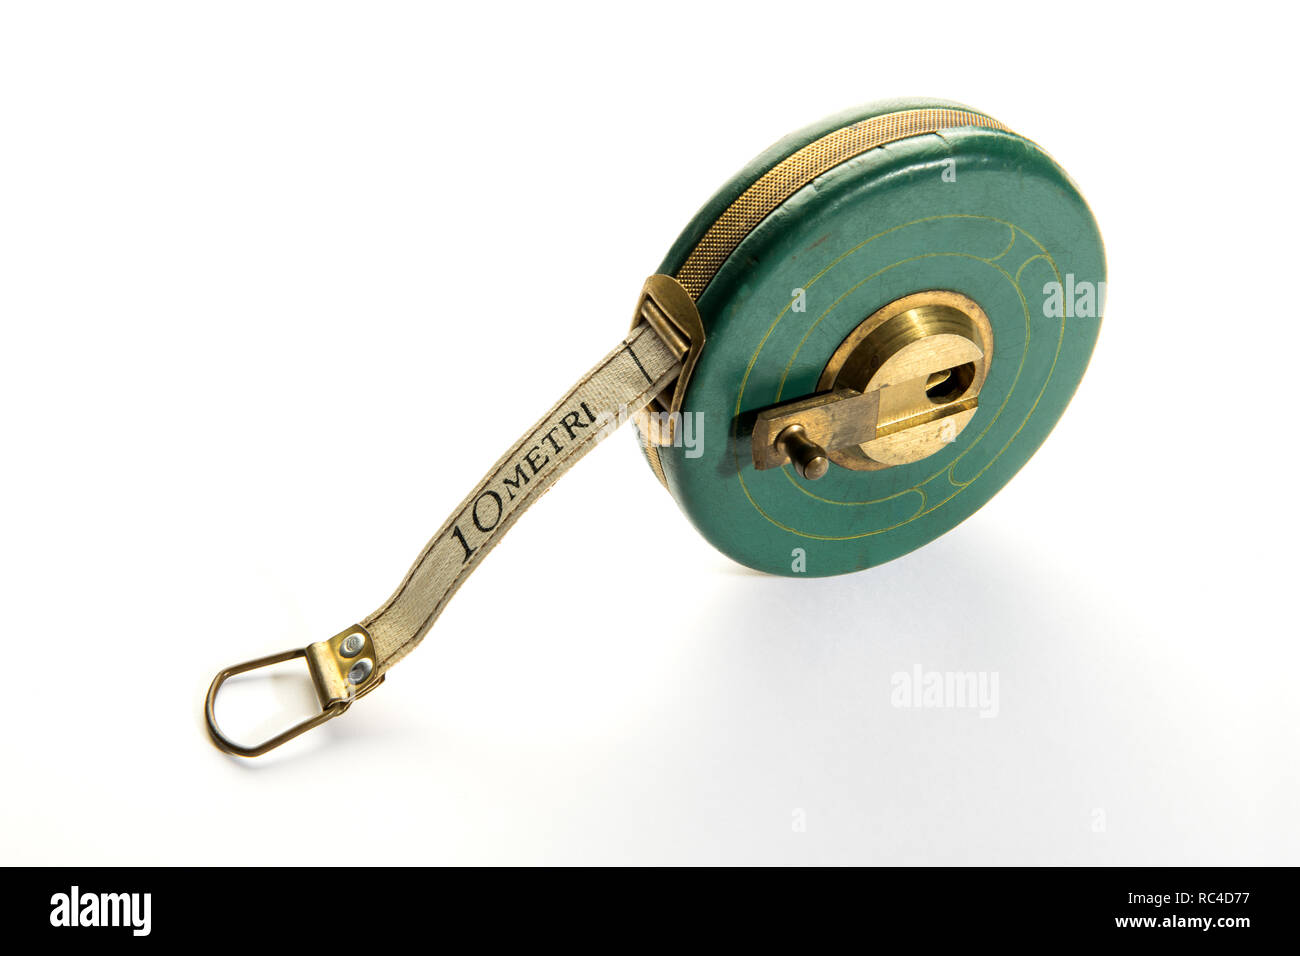 10 meter vintage measuring ribbon or tape-measure in round green body with yellow metal handle. Viewed from high angle in close-up, isolated on white  Stock Photo